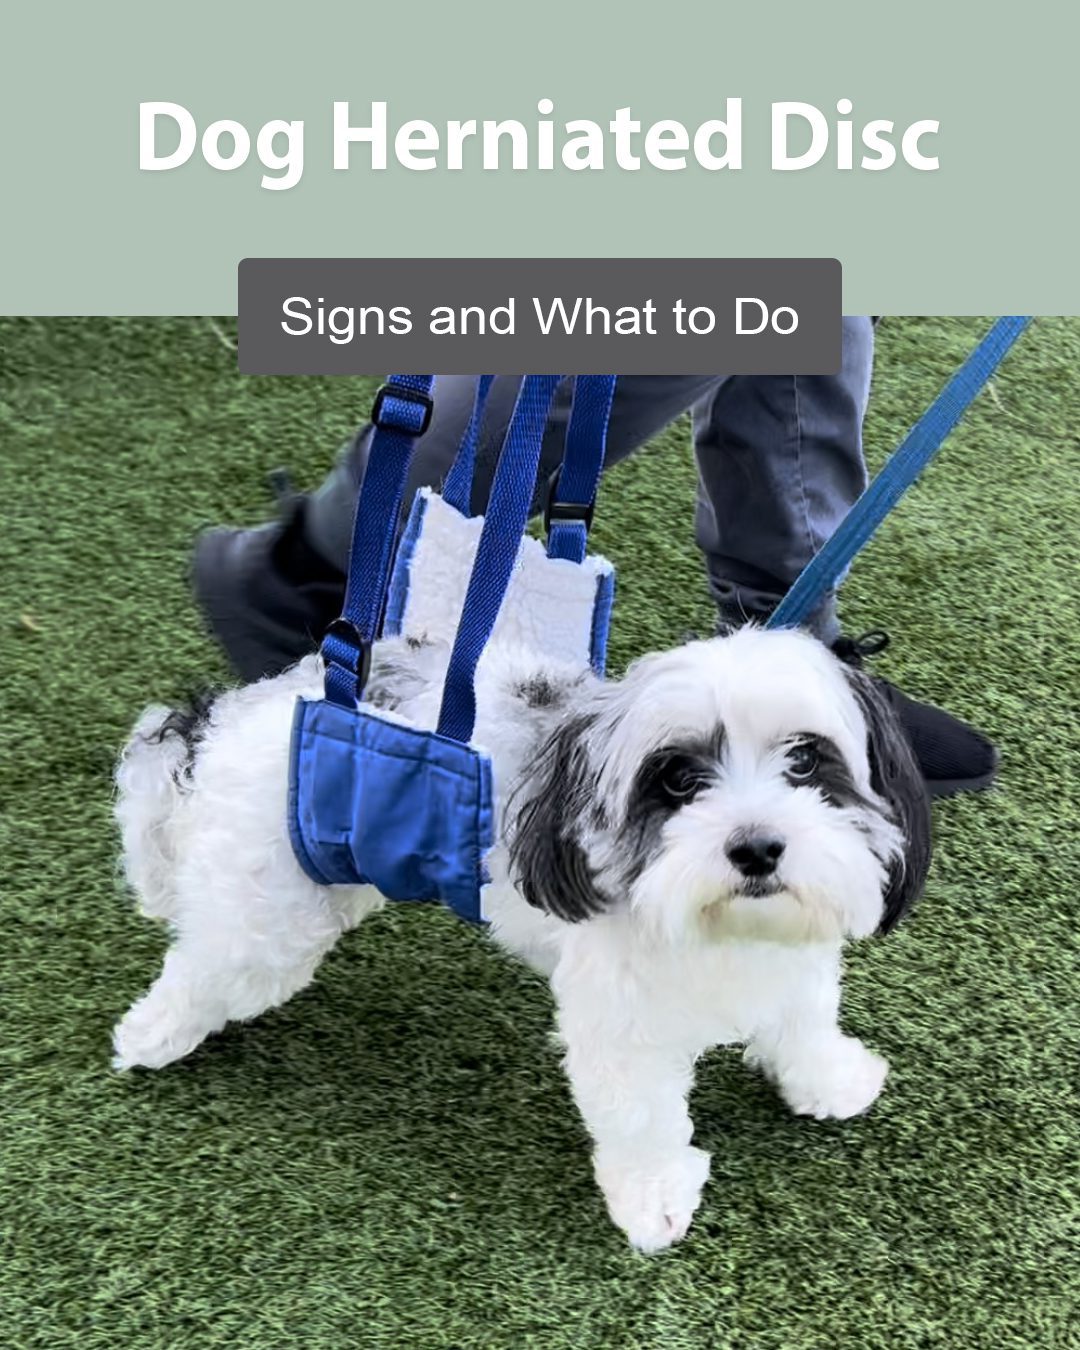 Dog Herniated Disc: Signs and What to Do